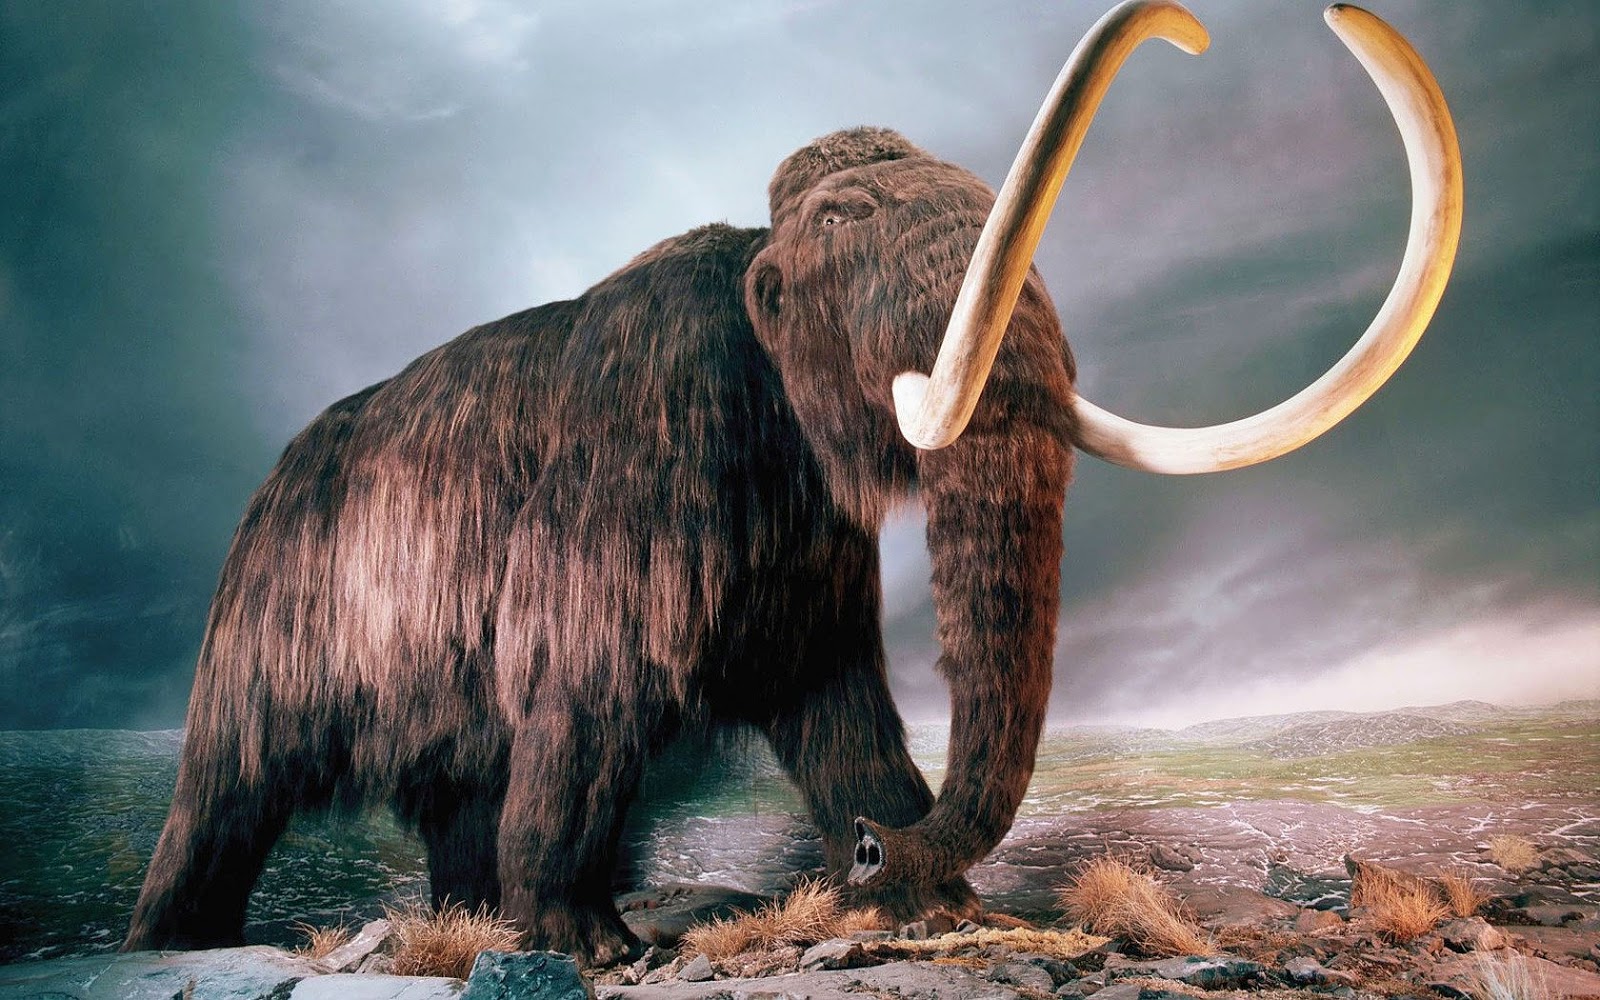 example of a woolly mammoth Photo: prehistoricflorida